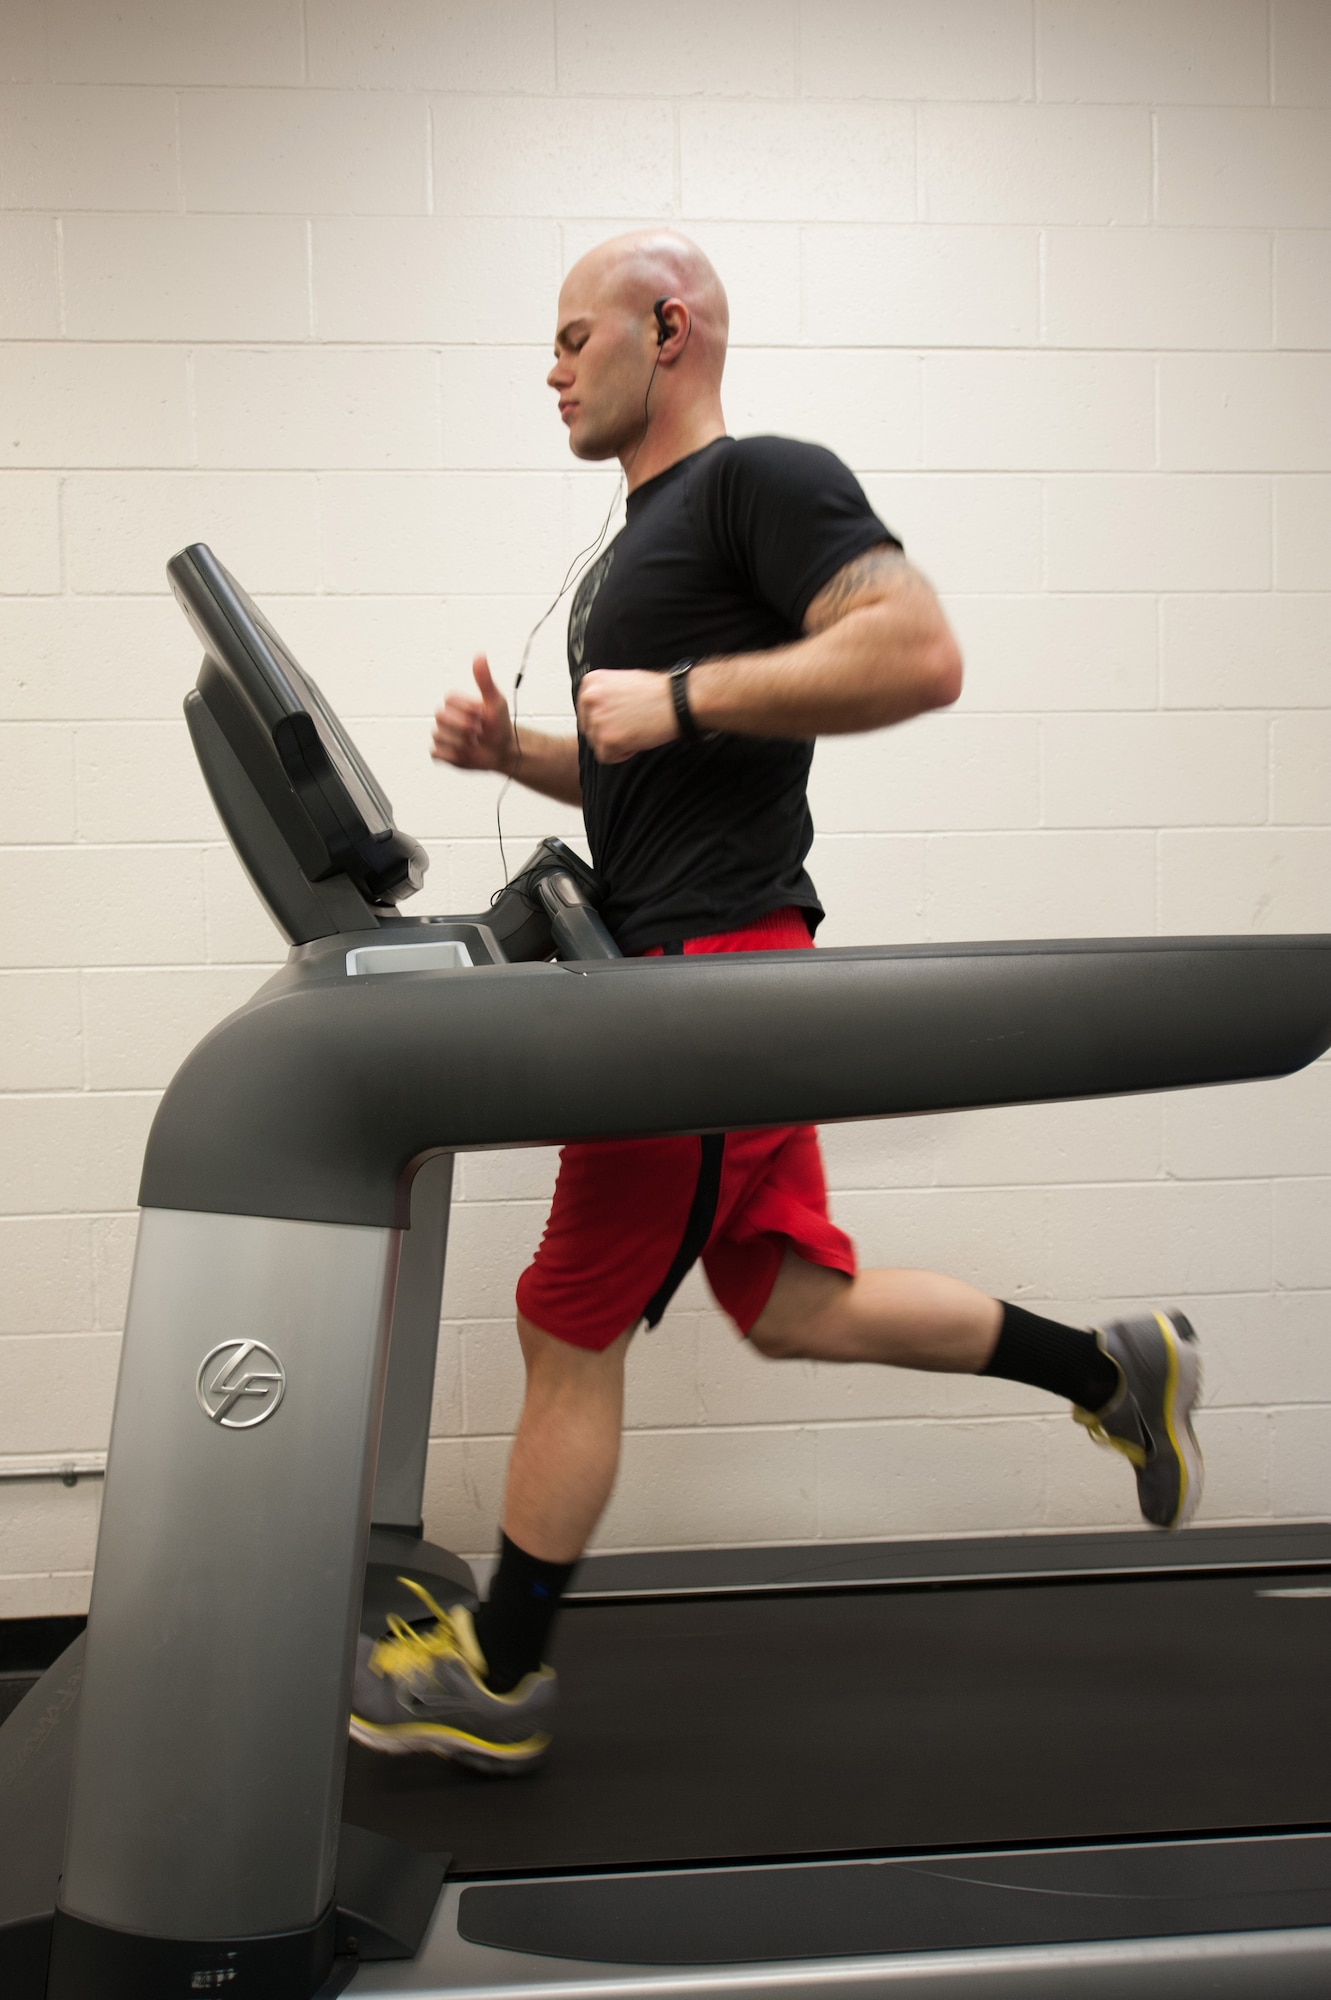 Senior Airman Shane Phipps, 30th Space Wing Public Affairs photojournalist, runs on a treadmill, March 4, 2015, Vandenberg Air Force Base, Calif. Since March is National Nutrition Month, members of the armed forces are provided an opportunity to assess their current fitness levels. (U.S. Air Force photo by Michael Peterson/Released)